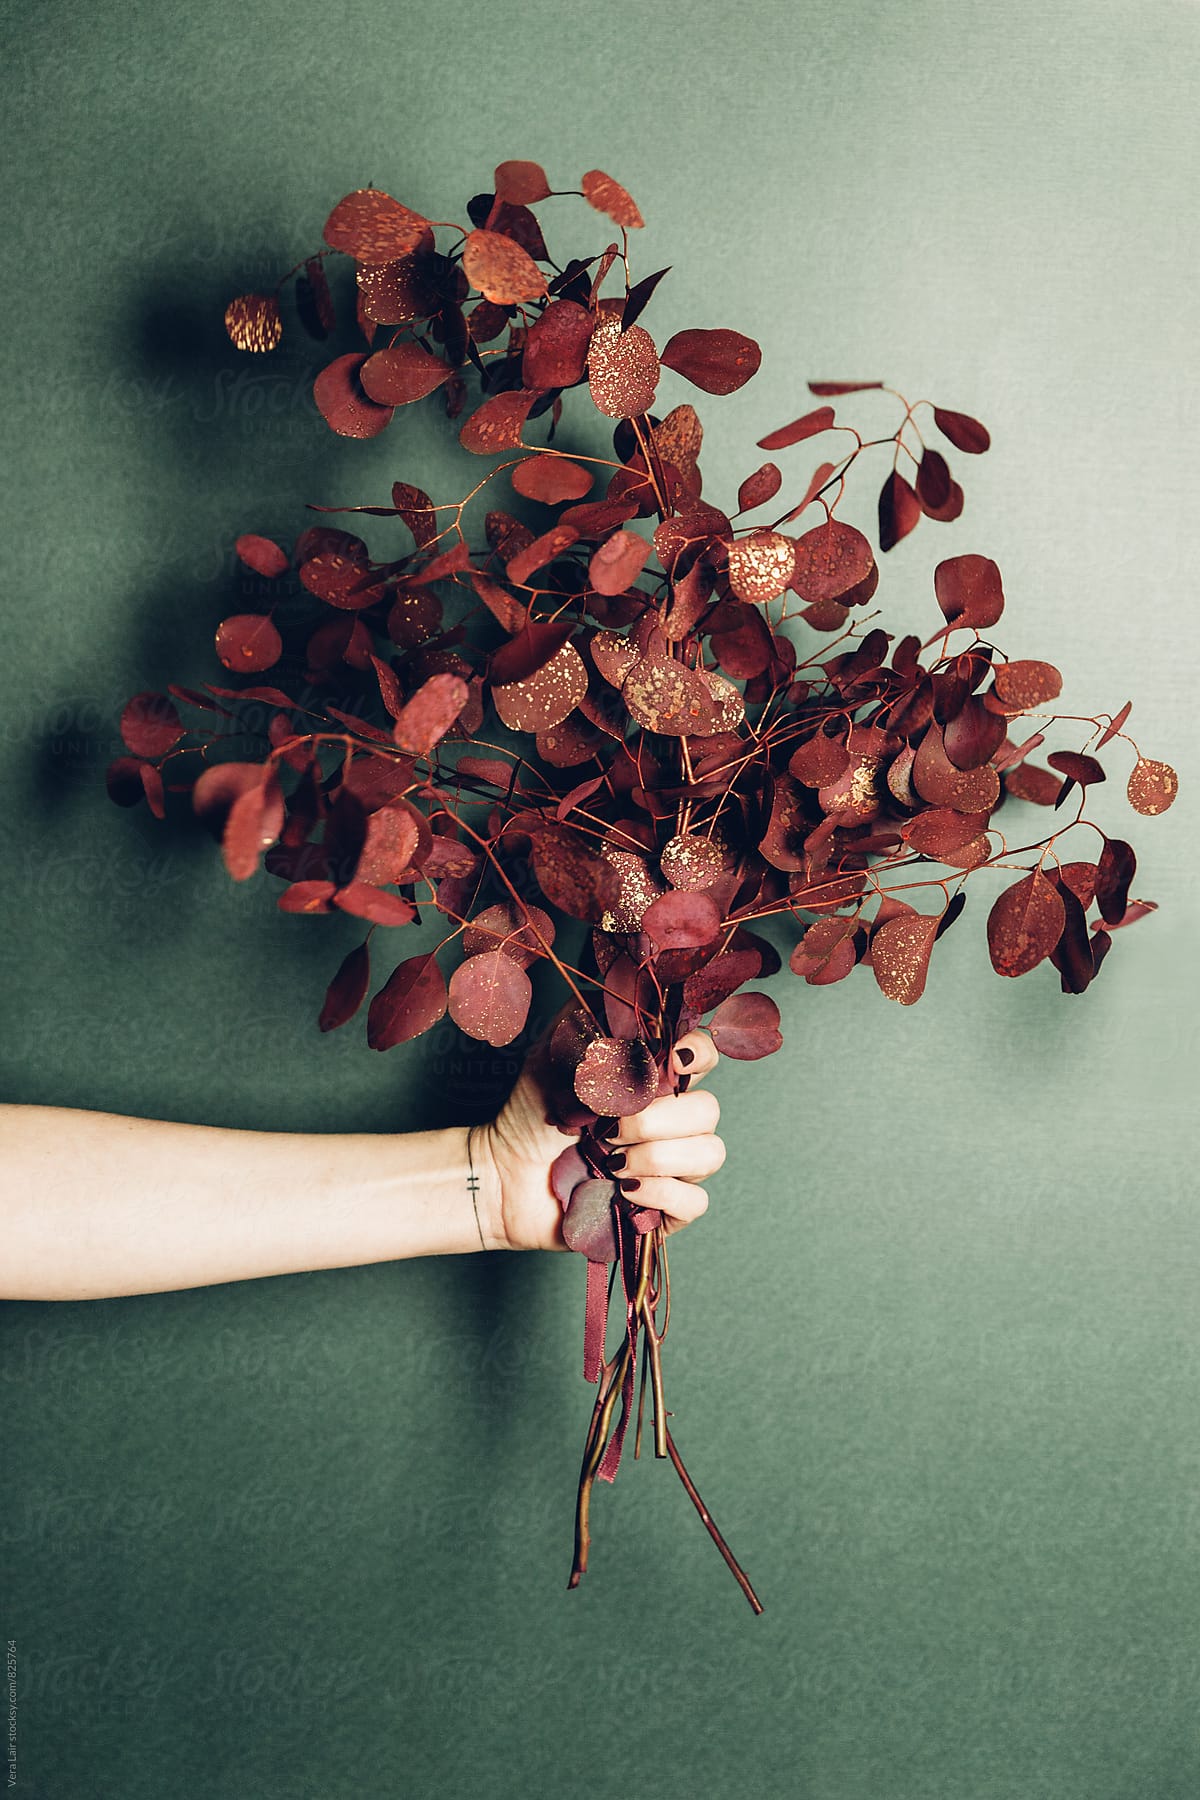 Hand holding a bouquet of red eucalyptus